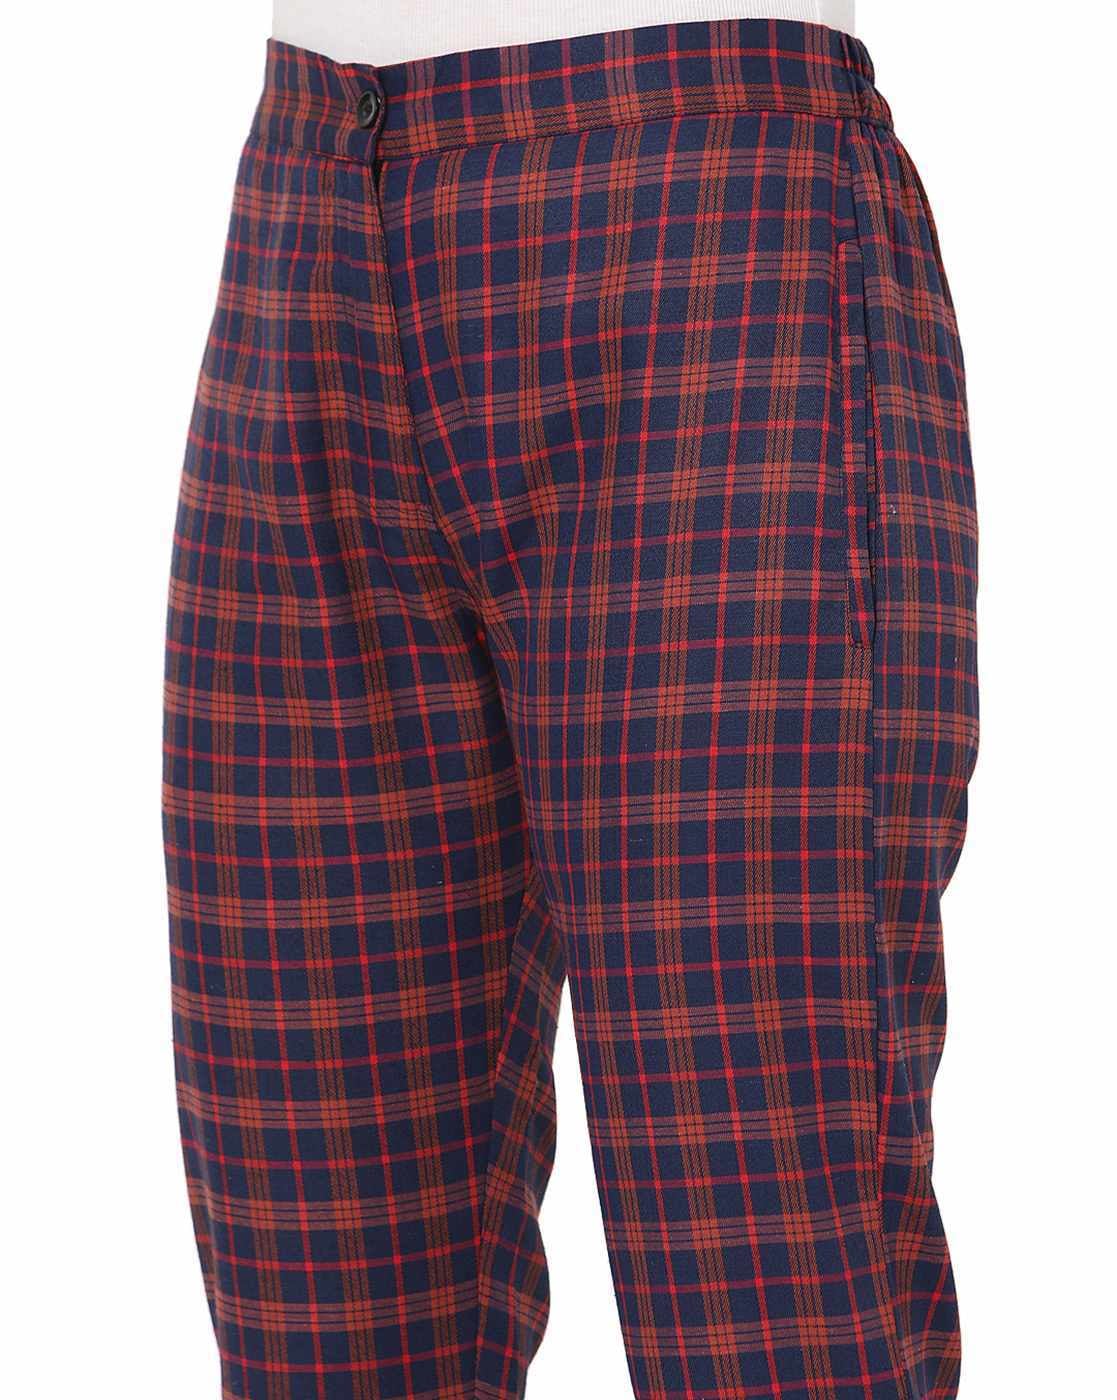 Sojanya Since 1958 Mens Cotton Blend Navy Blue  Red Checked Formal  Trousers